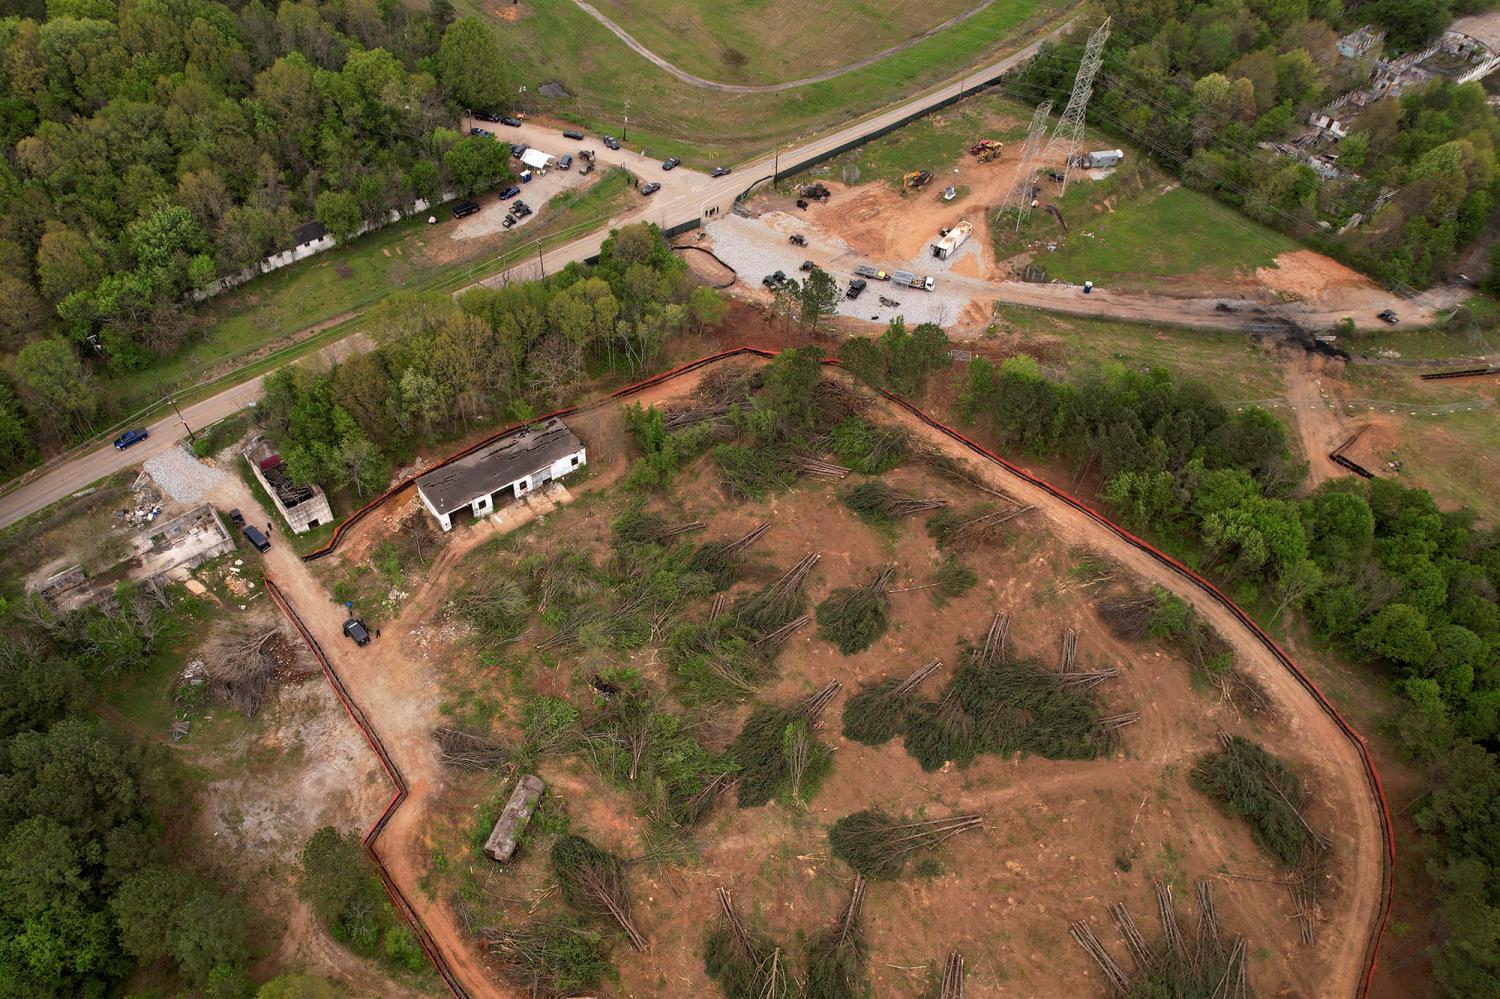 An aerial view of the planed site of a controversial "Cop City" project as the clear cutting of trees begins near Atlanta, Georgia, U.S., March 31, 2023. REUTERS/Cheney Orr/ File Photo